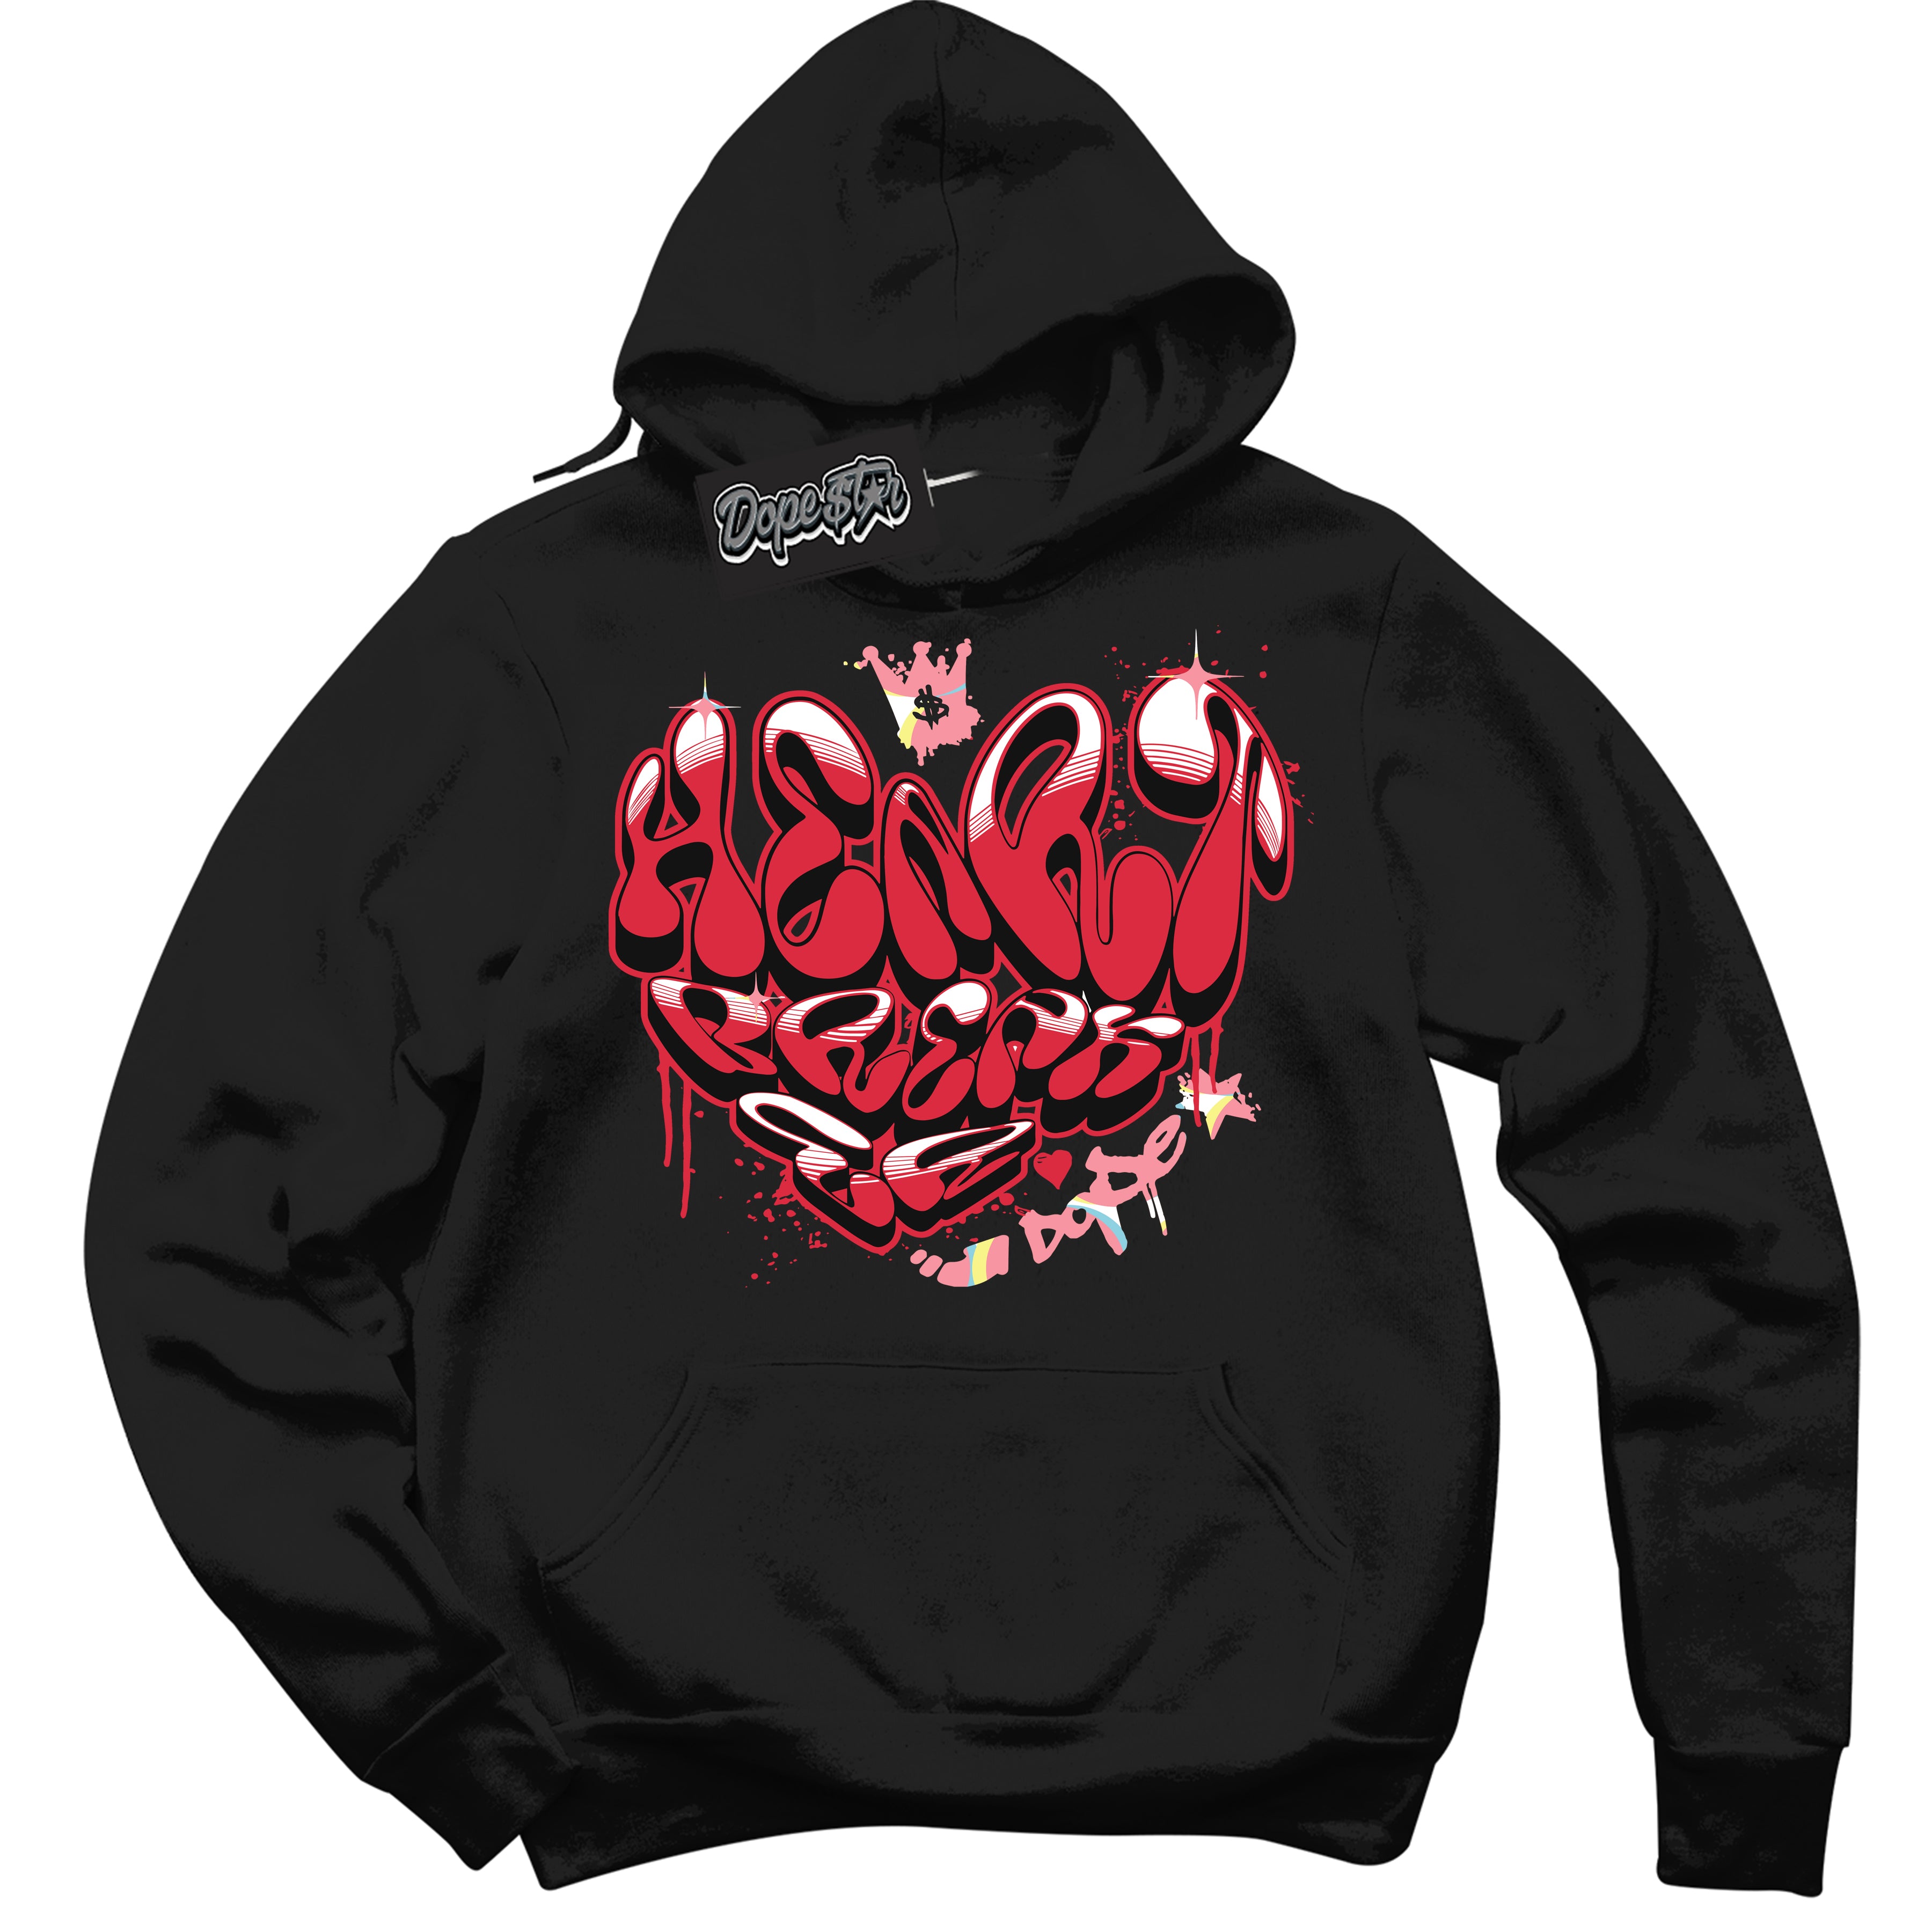 Cool Black Graphic DopeStar Hoodie with “ Heartbreaker Graffiti “ print, that perfectly matches Spider-Verse 1s sneakers